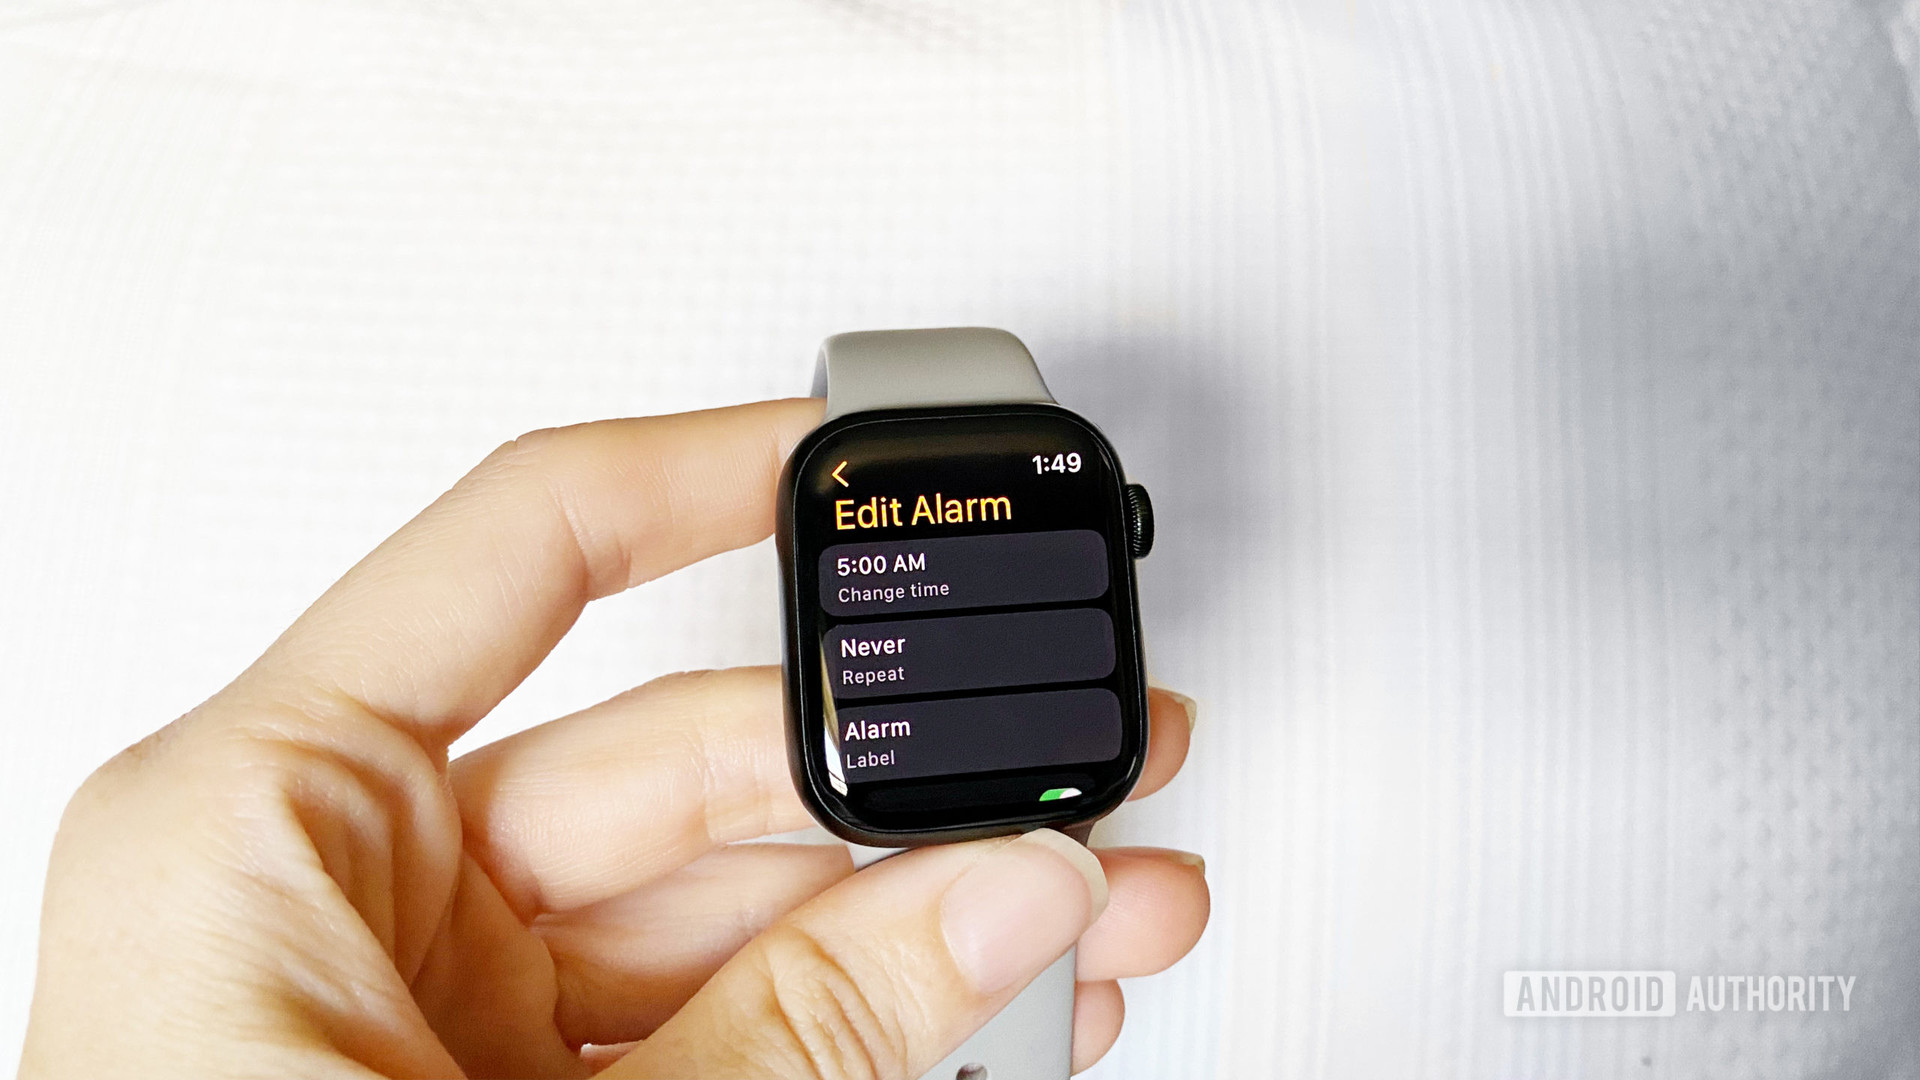 An Apple Watch Series 7 user edits an existing alarm on her watch.